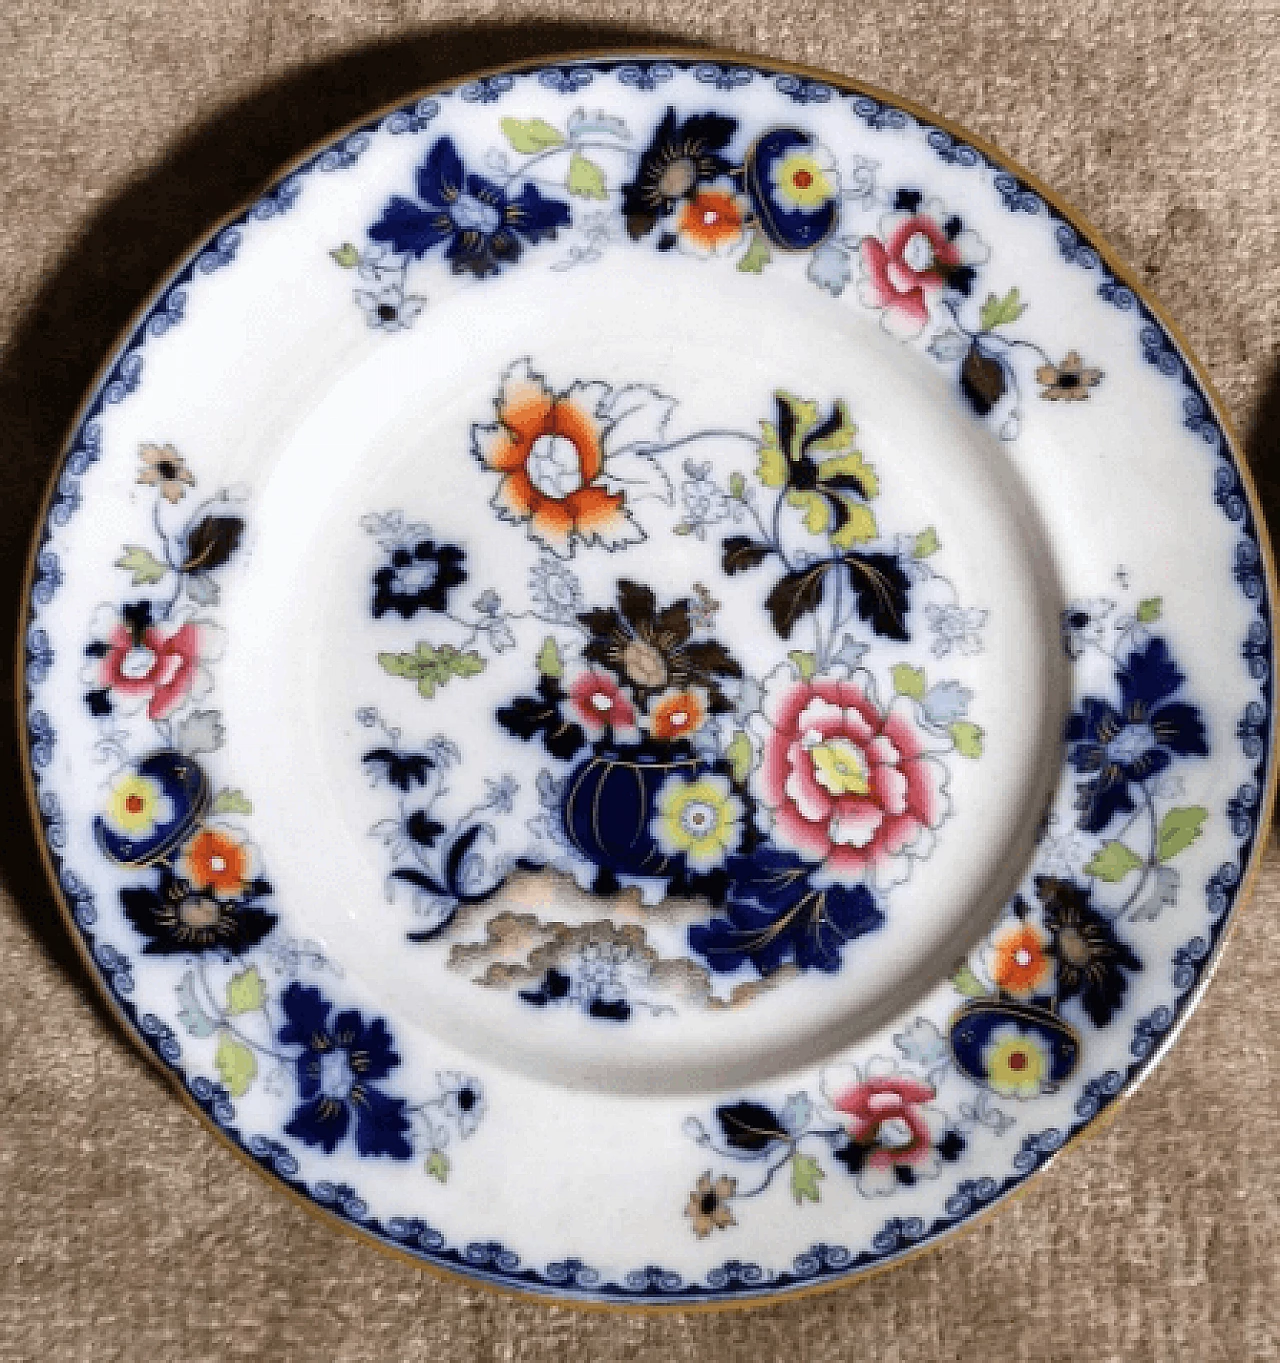 4 Victorian ceramic plates with Royal Arms mark, mid-19th century 6